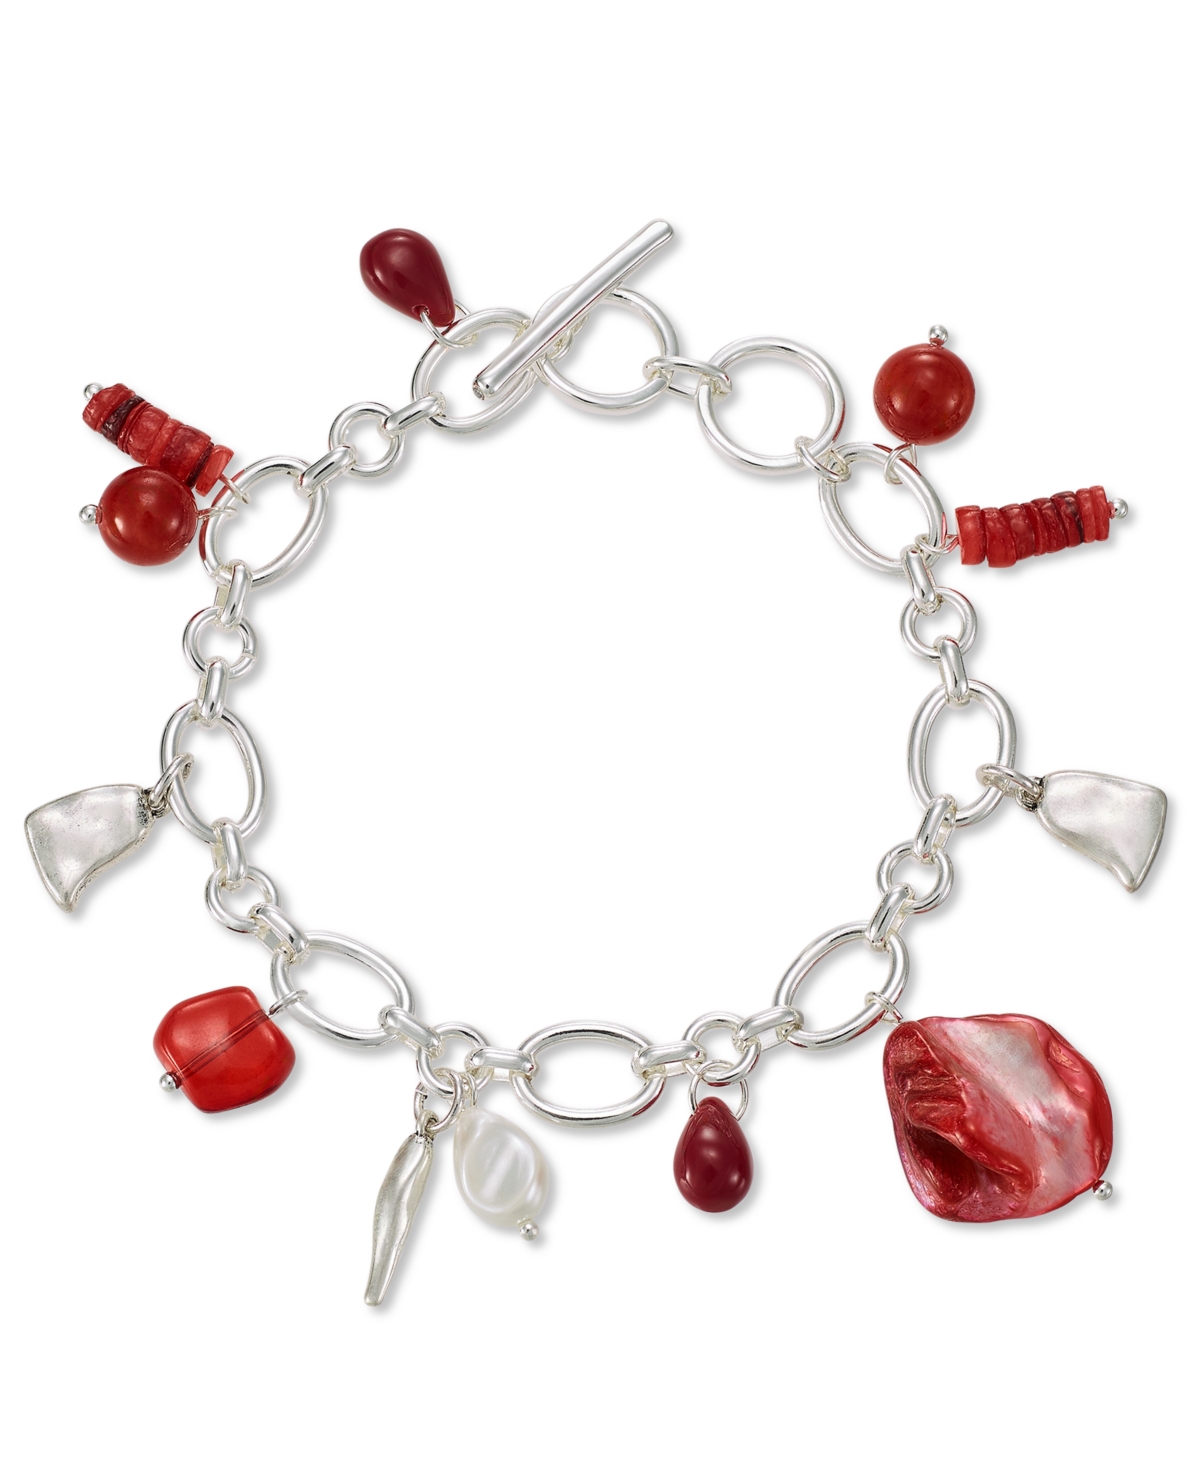 Mixed-Metal Beaded Charm Bracelet, Created for Macy's - Brown